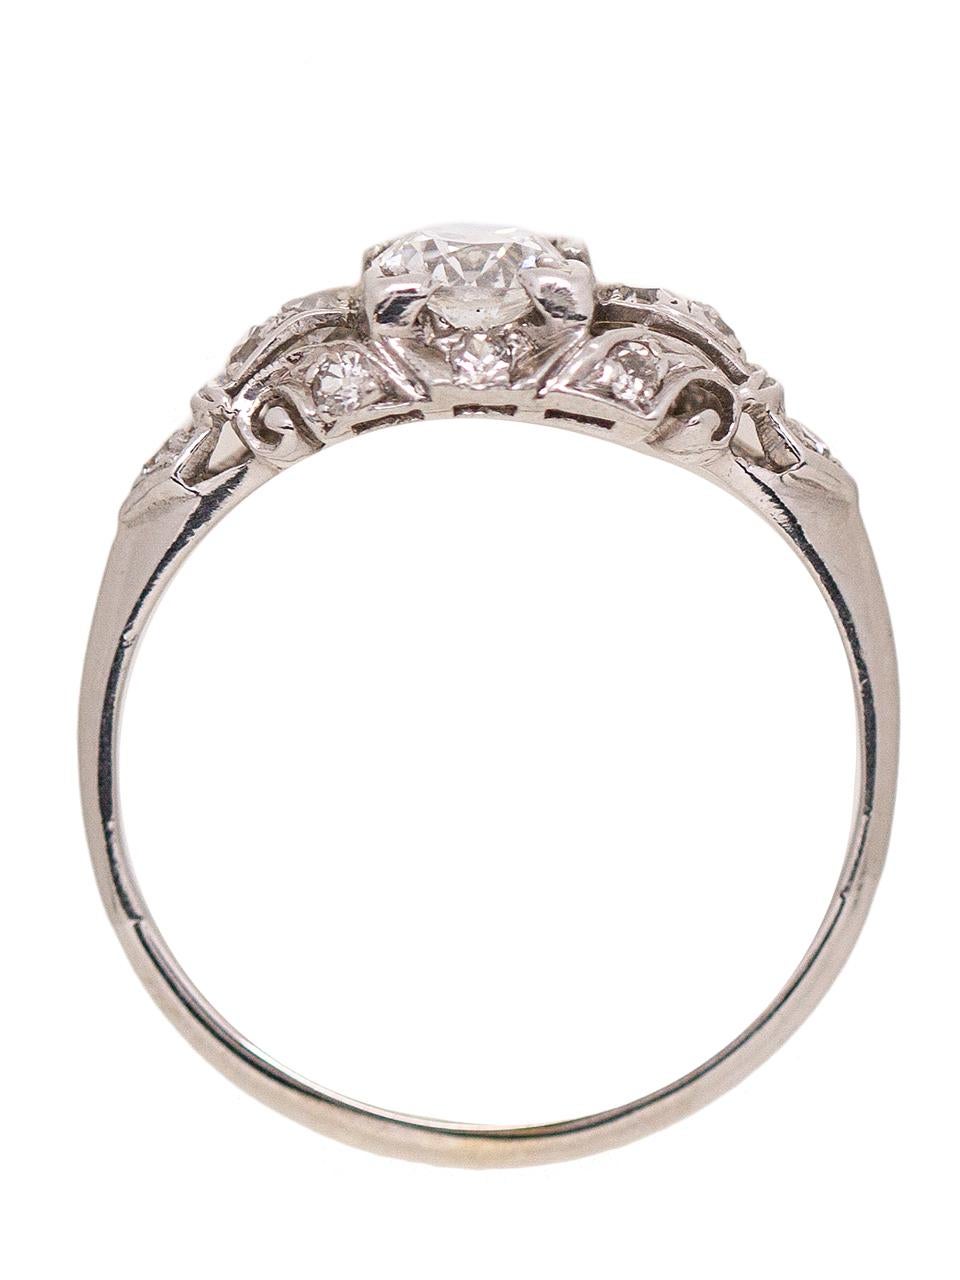 Art Deco 1930s White Gold and Diamond Engagement Ring 0.46 Carat Old European Cut For Sale